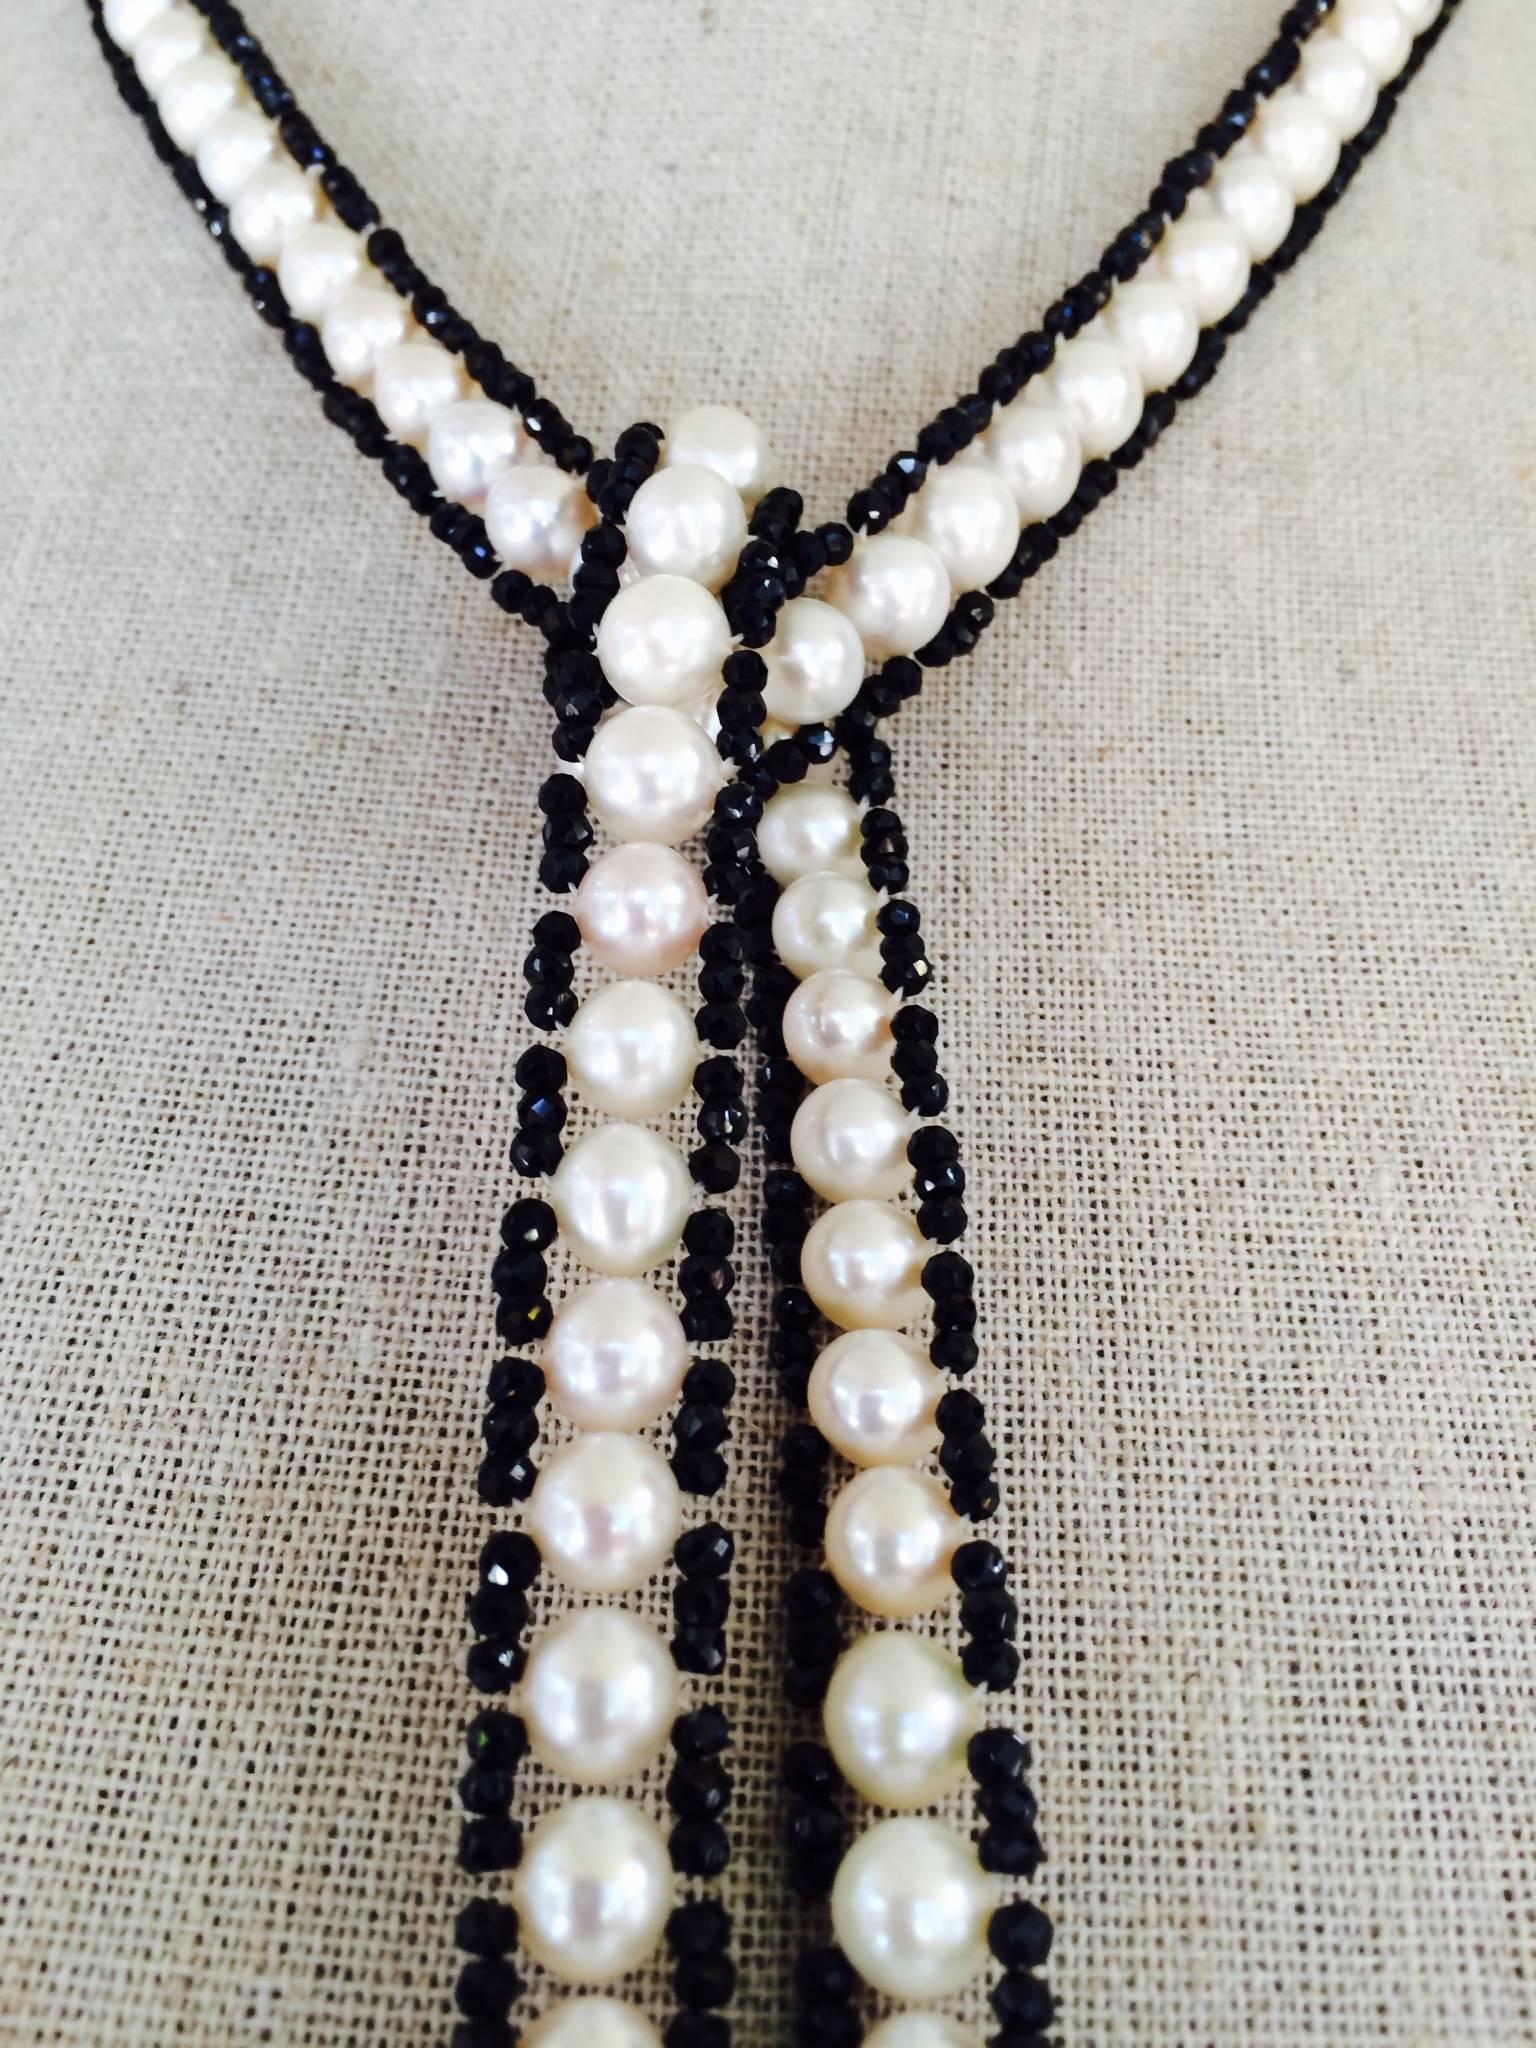 Woven White Pearl, Faceted Black Spinel, and Onyx Beaded Sautoir by Marina J  3